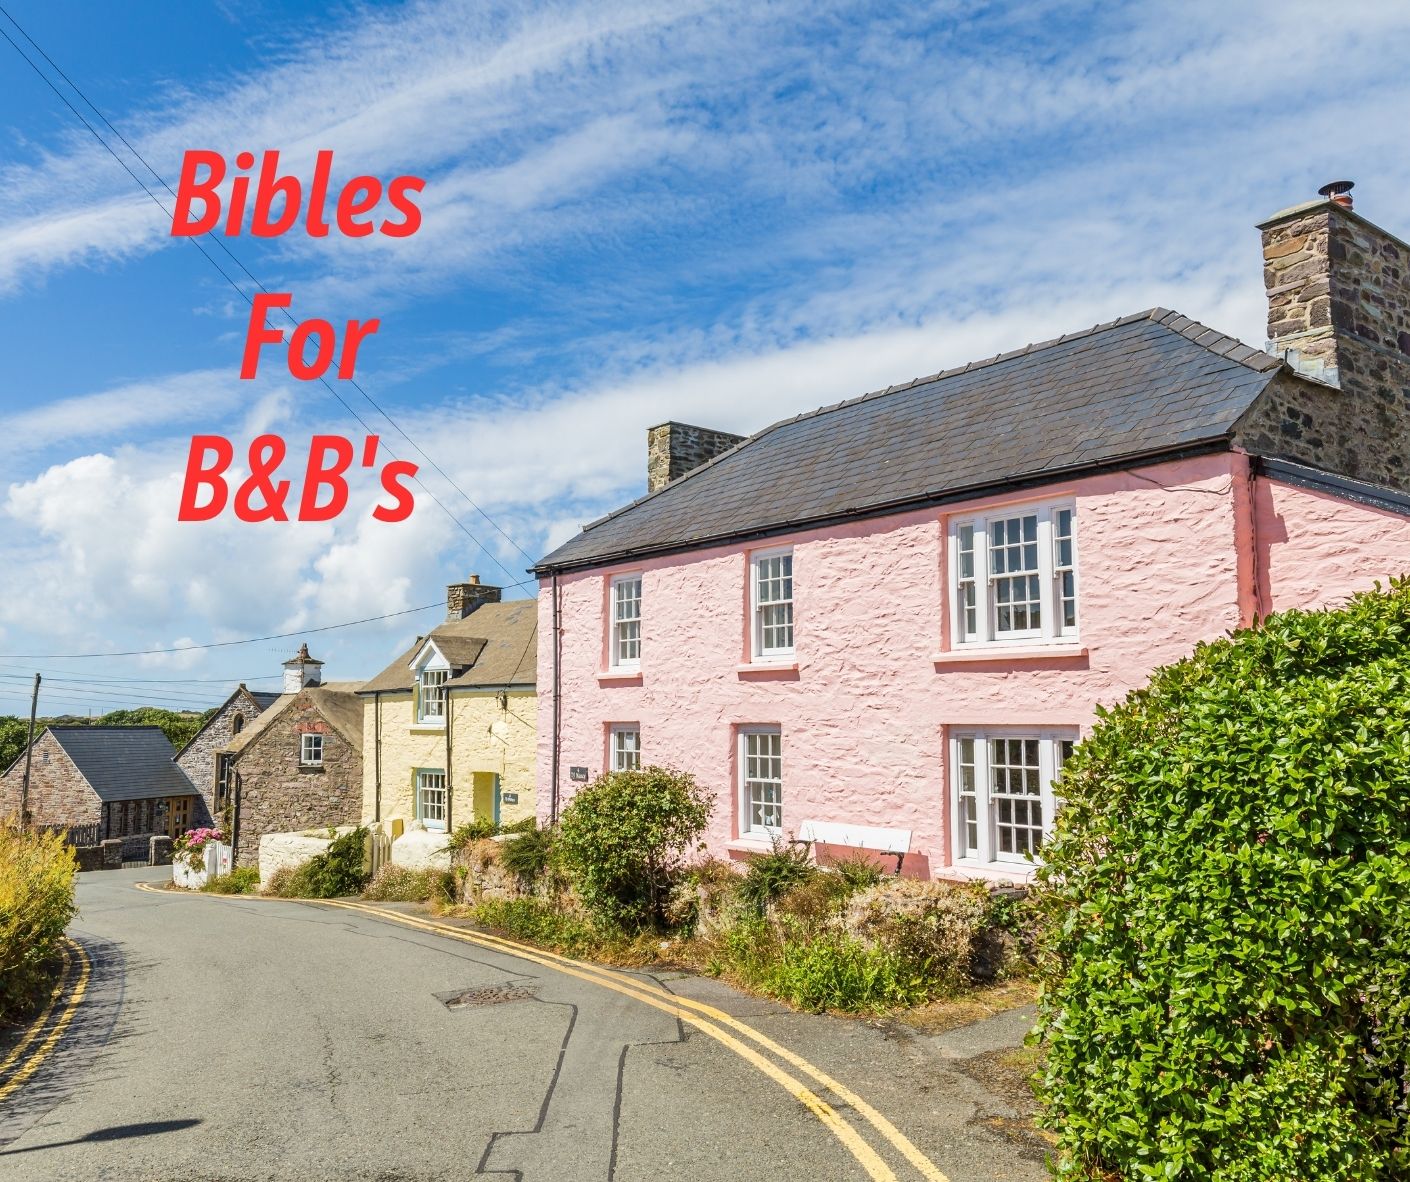 Good News For Everyone - Become a Member - Bibles for BnBs